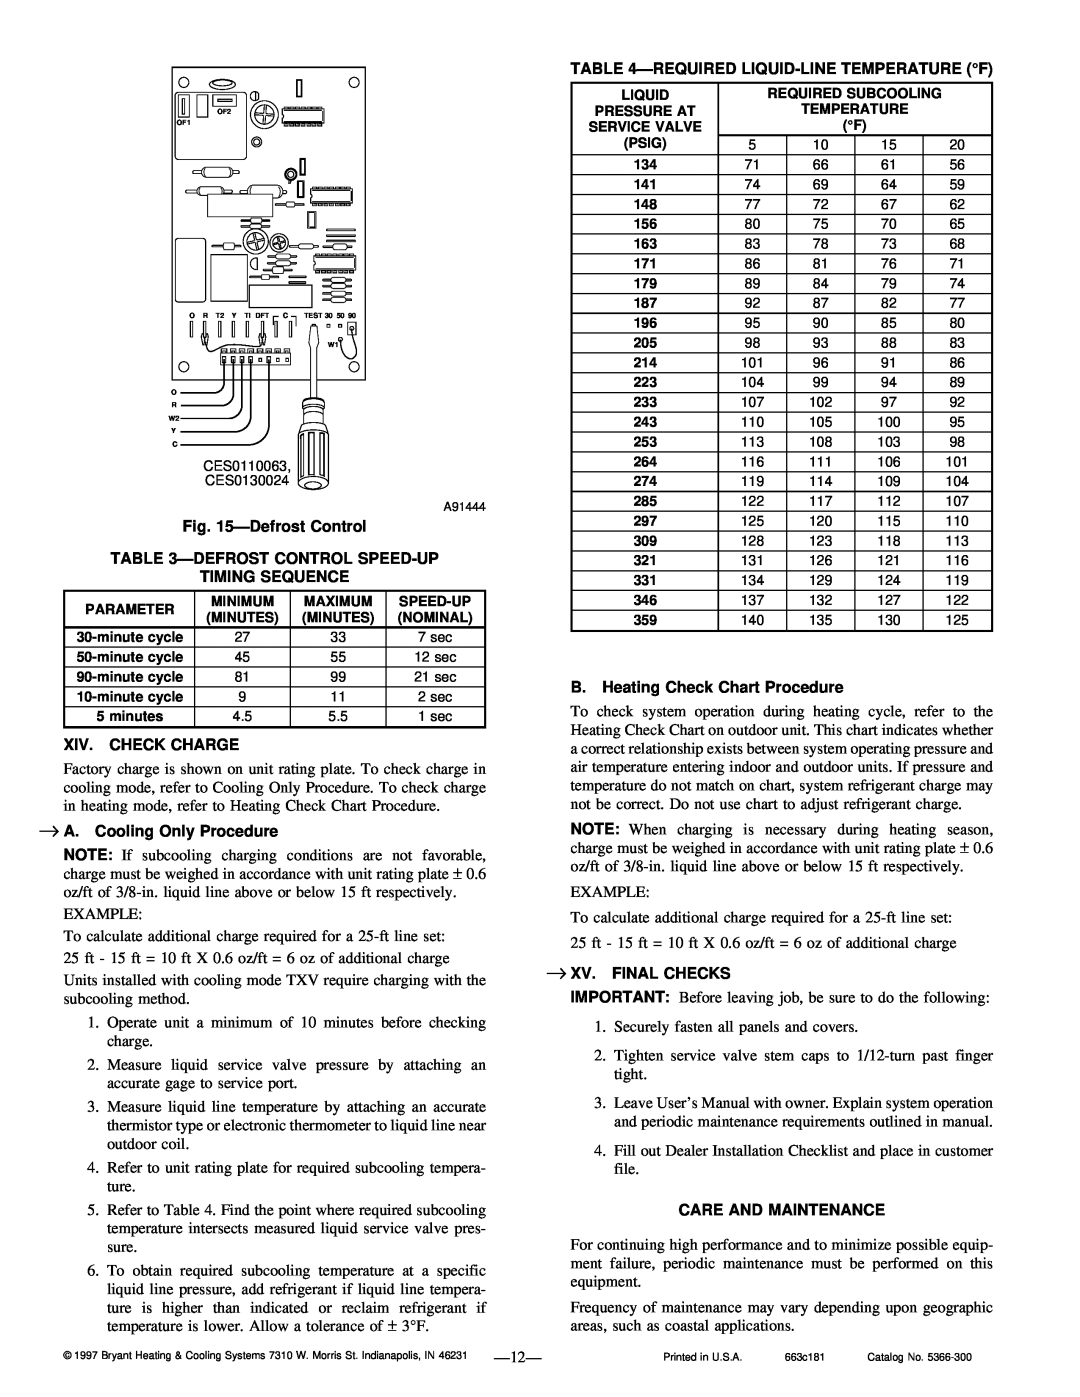 Bryant 663C ÐDefrost Control, Ðdefrost Control Speed-Up Timing Sequence, Xiv. Check Charge, →A. Cooling Only Procedure 